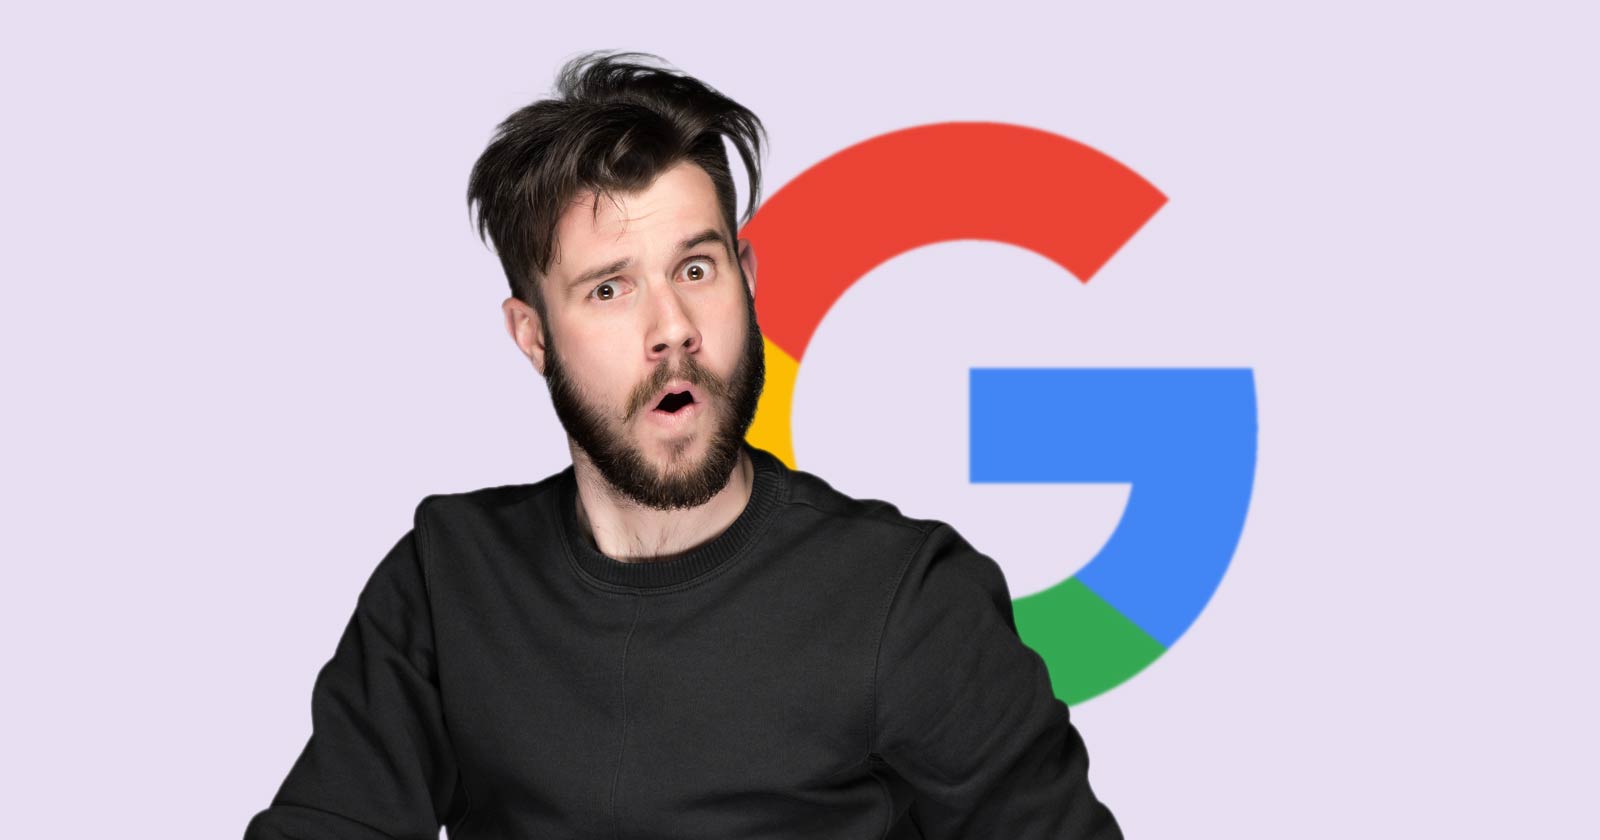 Google explains to an SEO why anonymous Redditor outranks expert bloggers